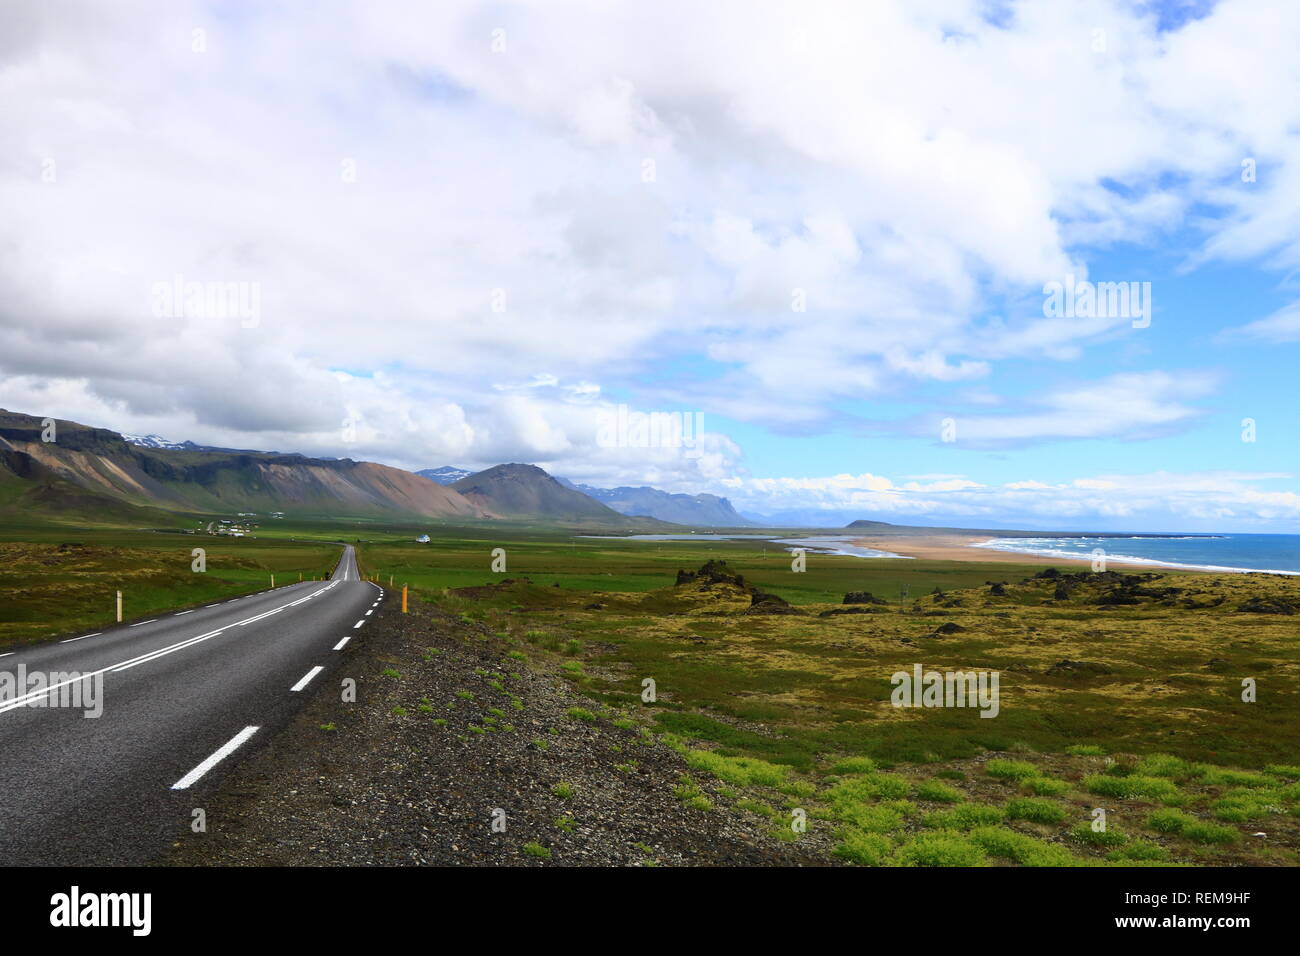 Street in Iceland landscape with mountains, beach and lava Stock Photo